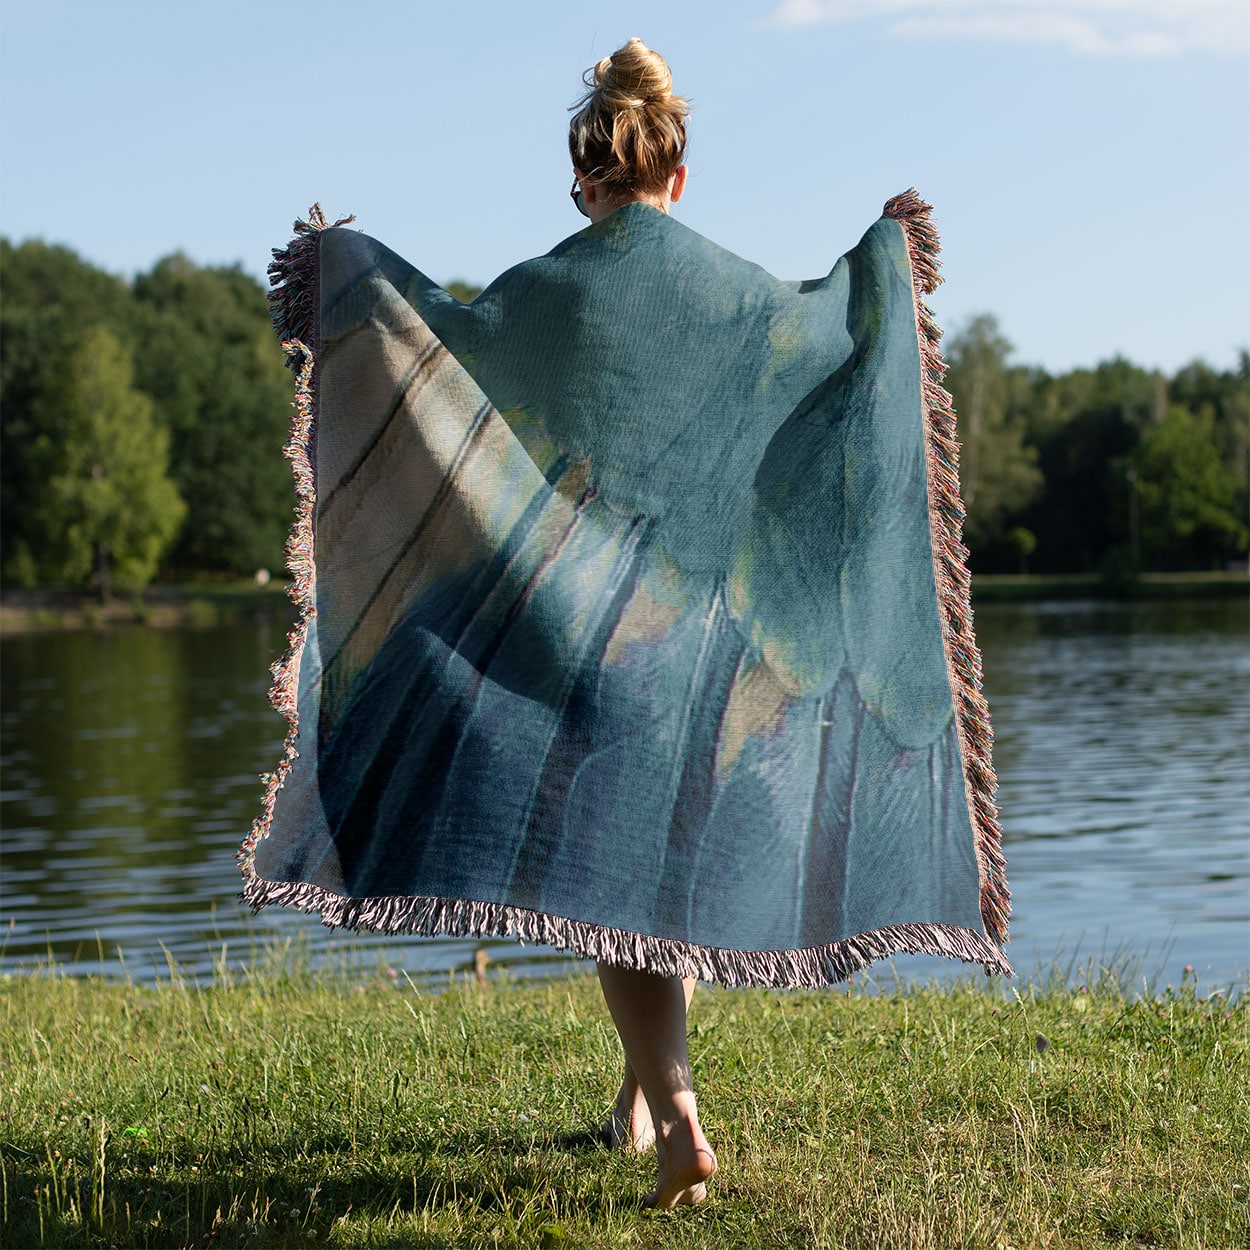 Aesthetic Wing Woven Blanket Held on a Woman's Back Outside